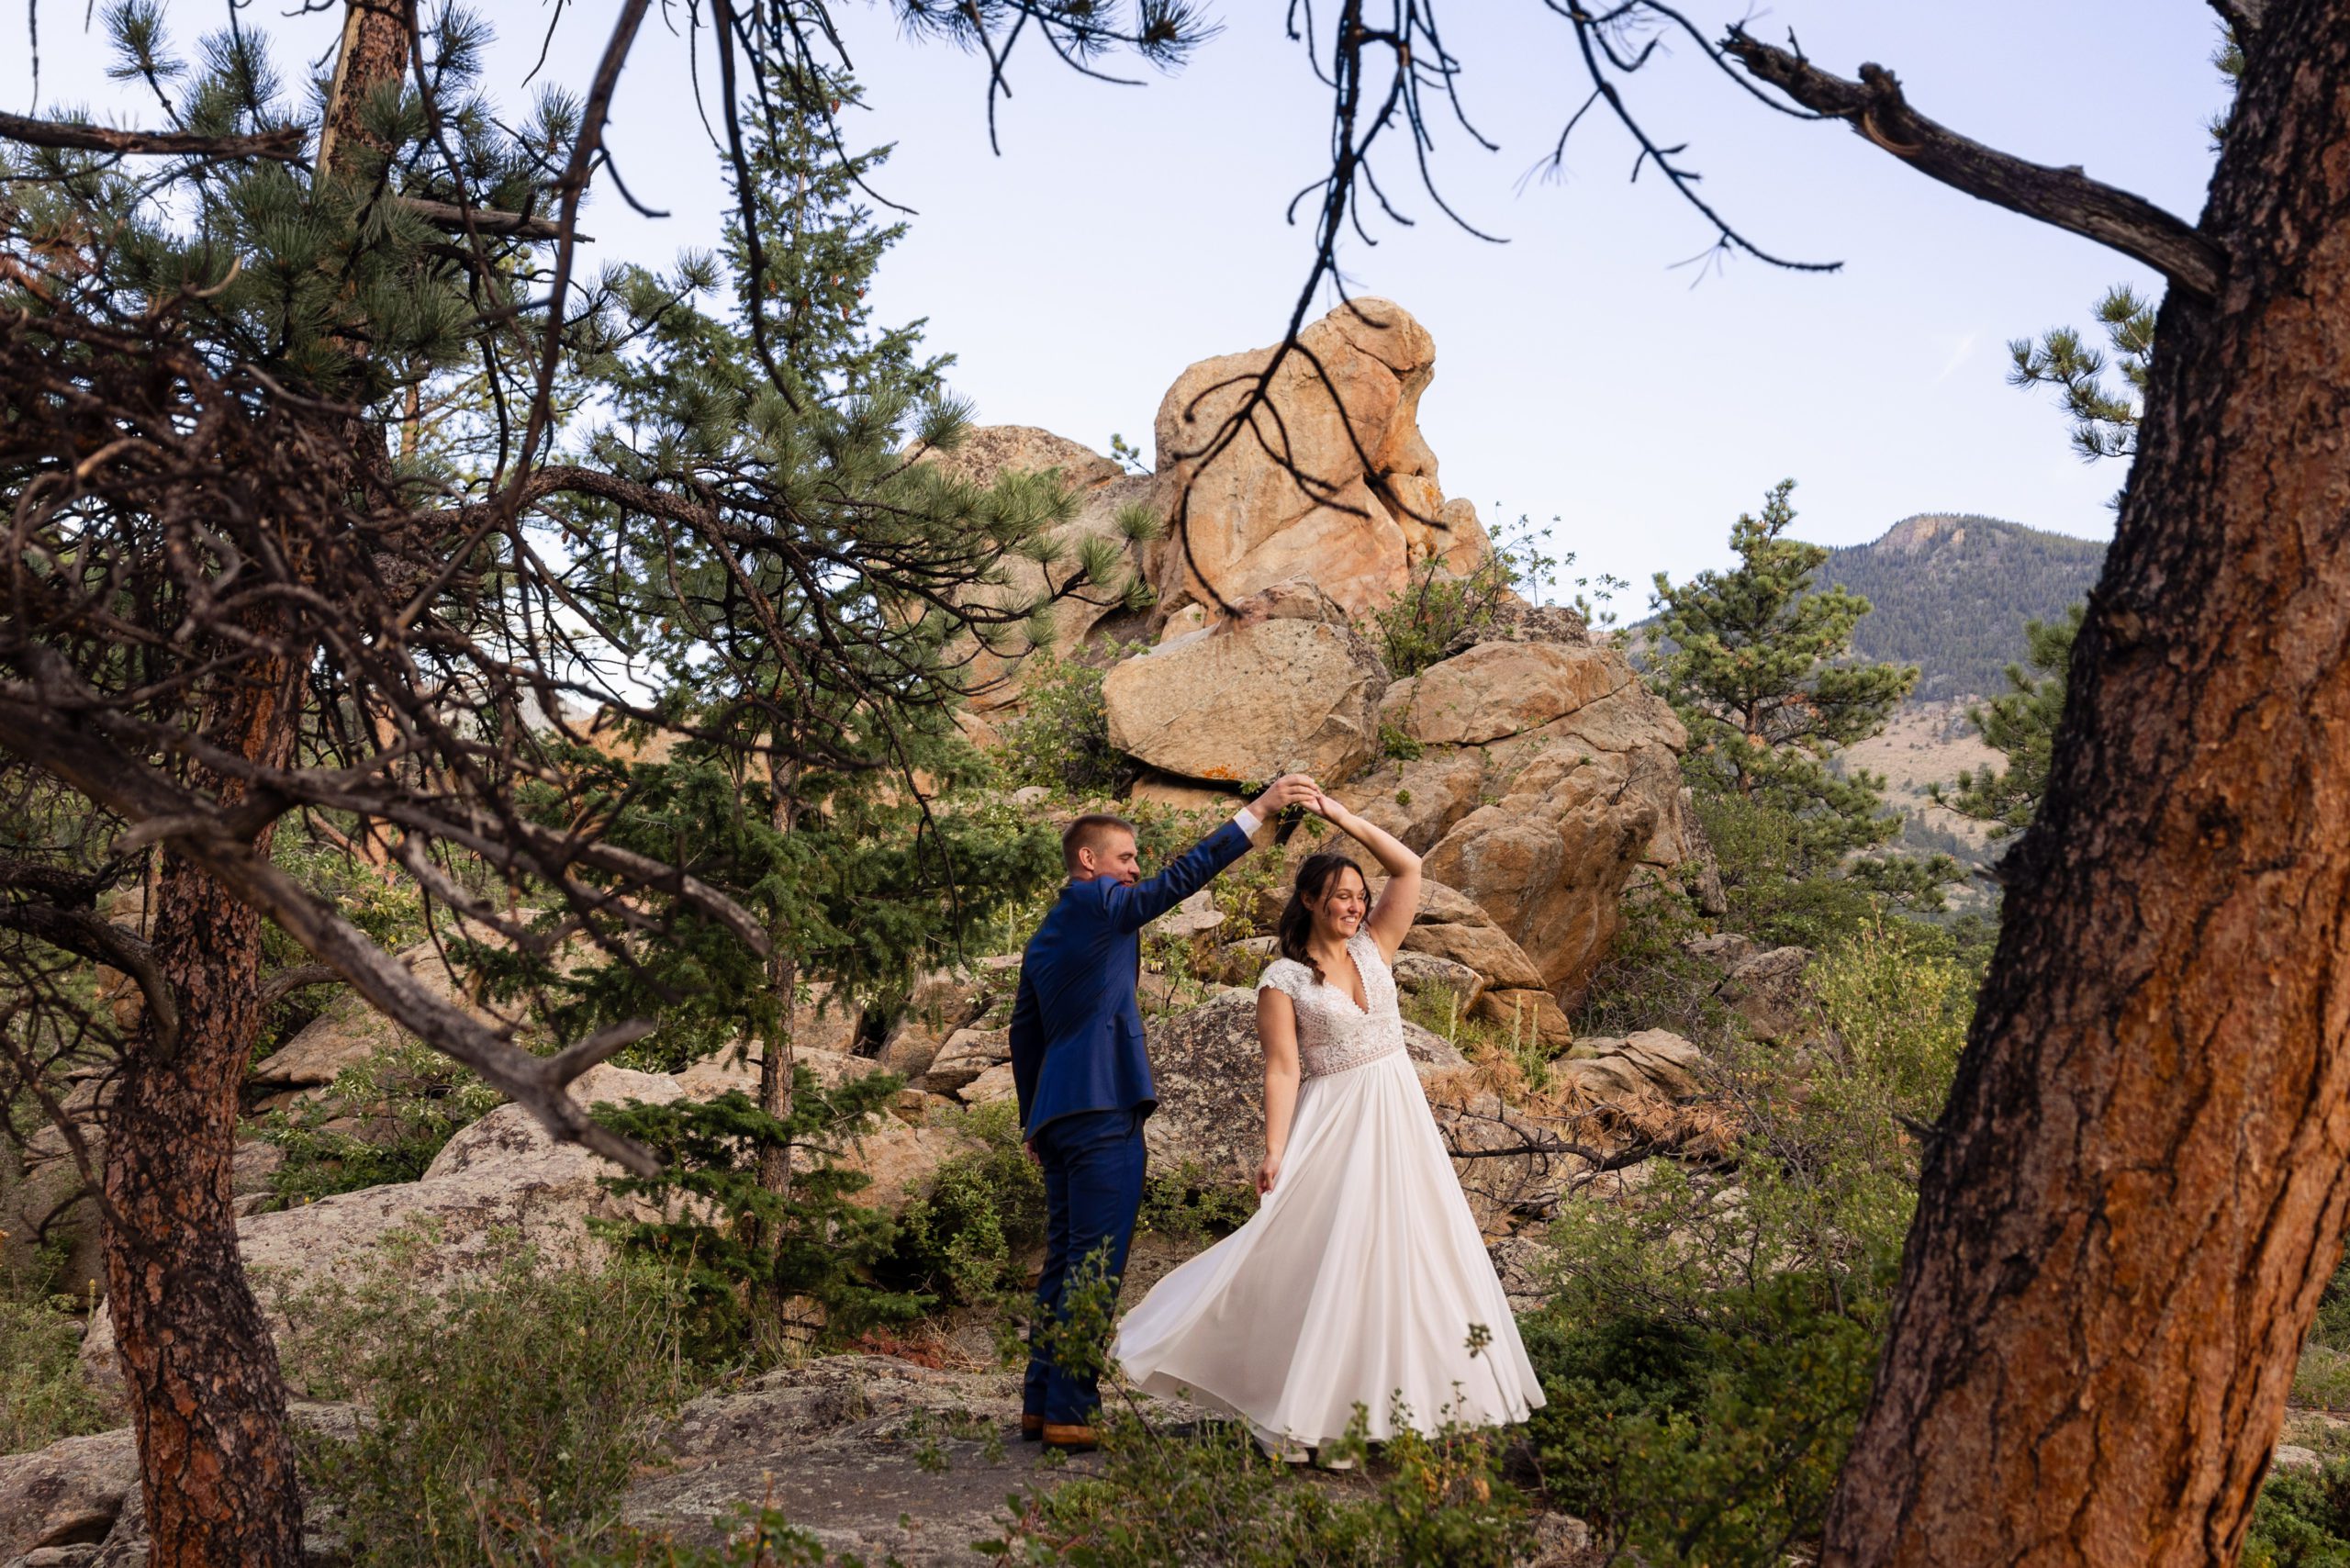 The groom and bride dancing in the woods, before their wedding at Romantic RiverSong Inn in Estes Park. 